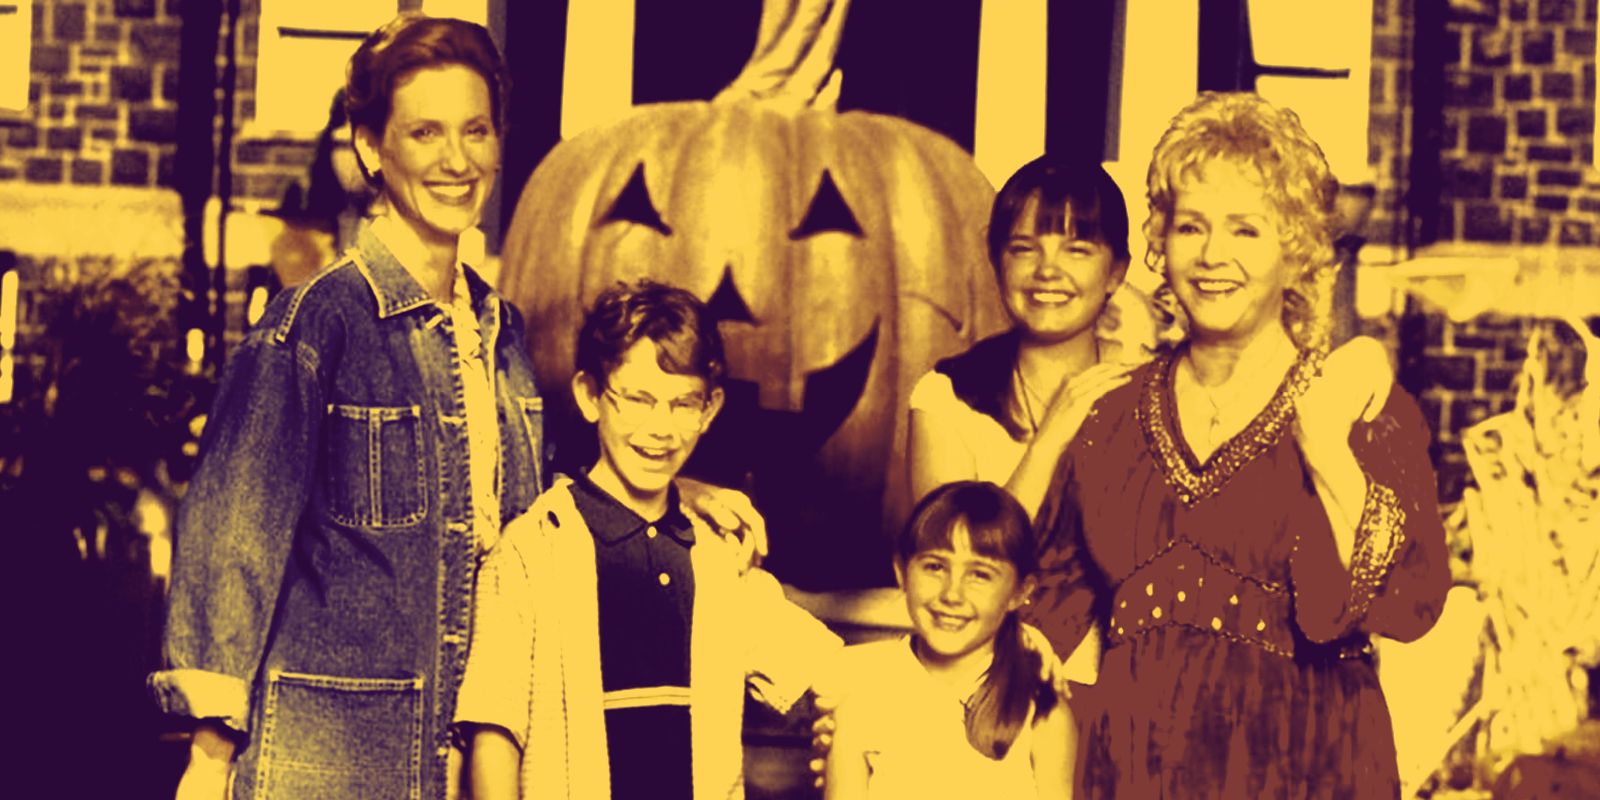 The Cromwell and Piper Family in front of the Halloweentown pumpkin